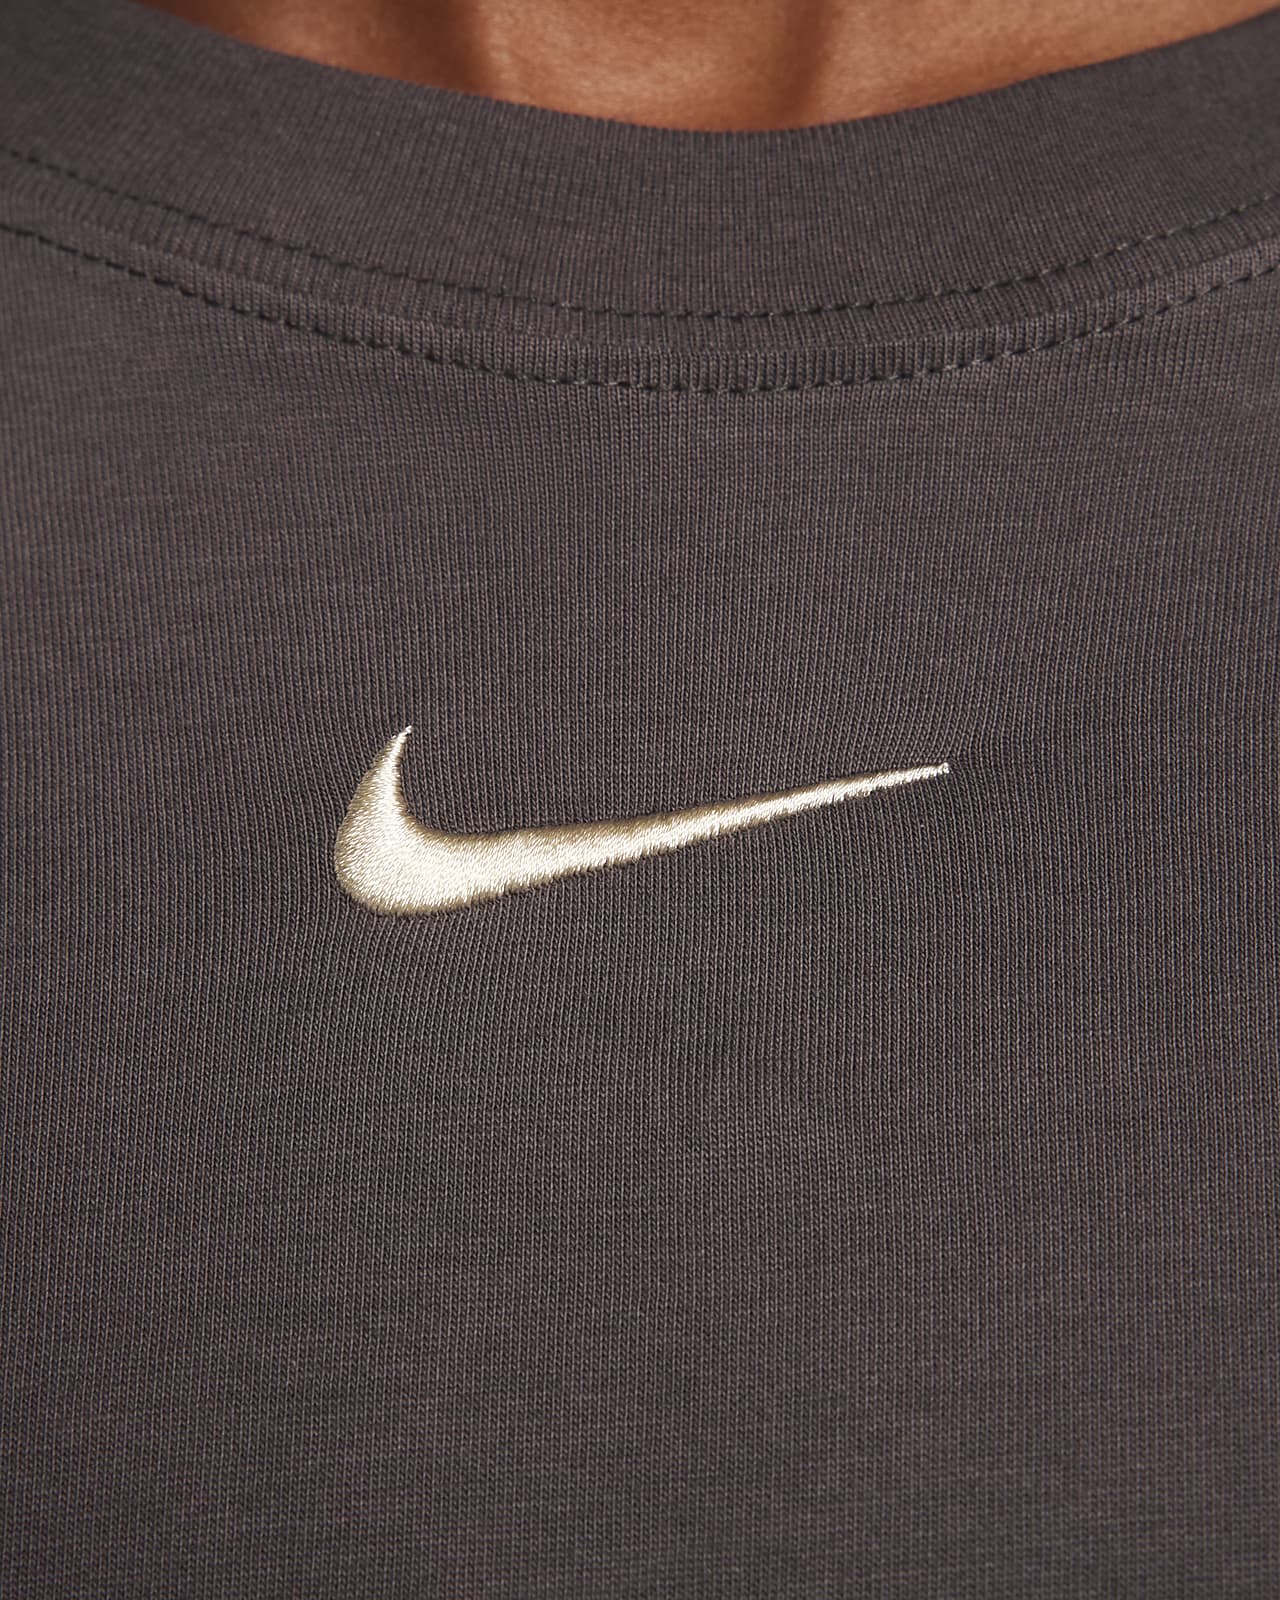 Nike Women's Clothing, Clothes for Women